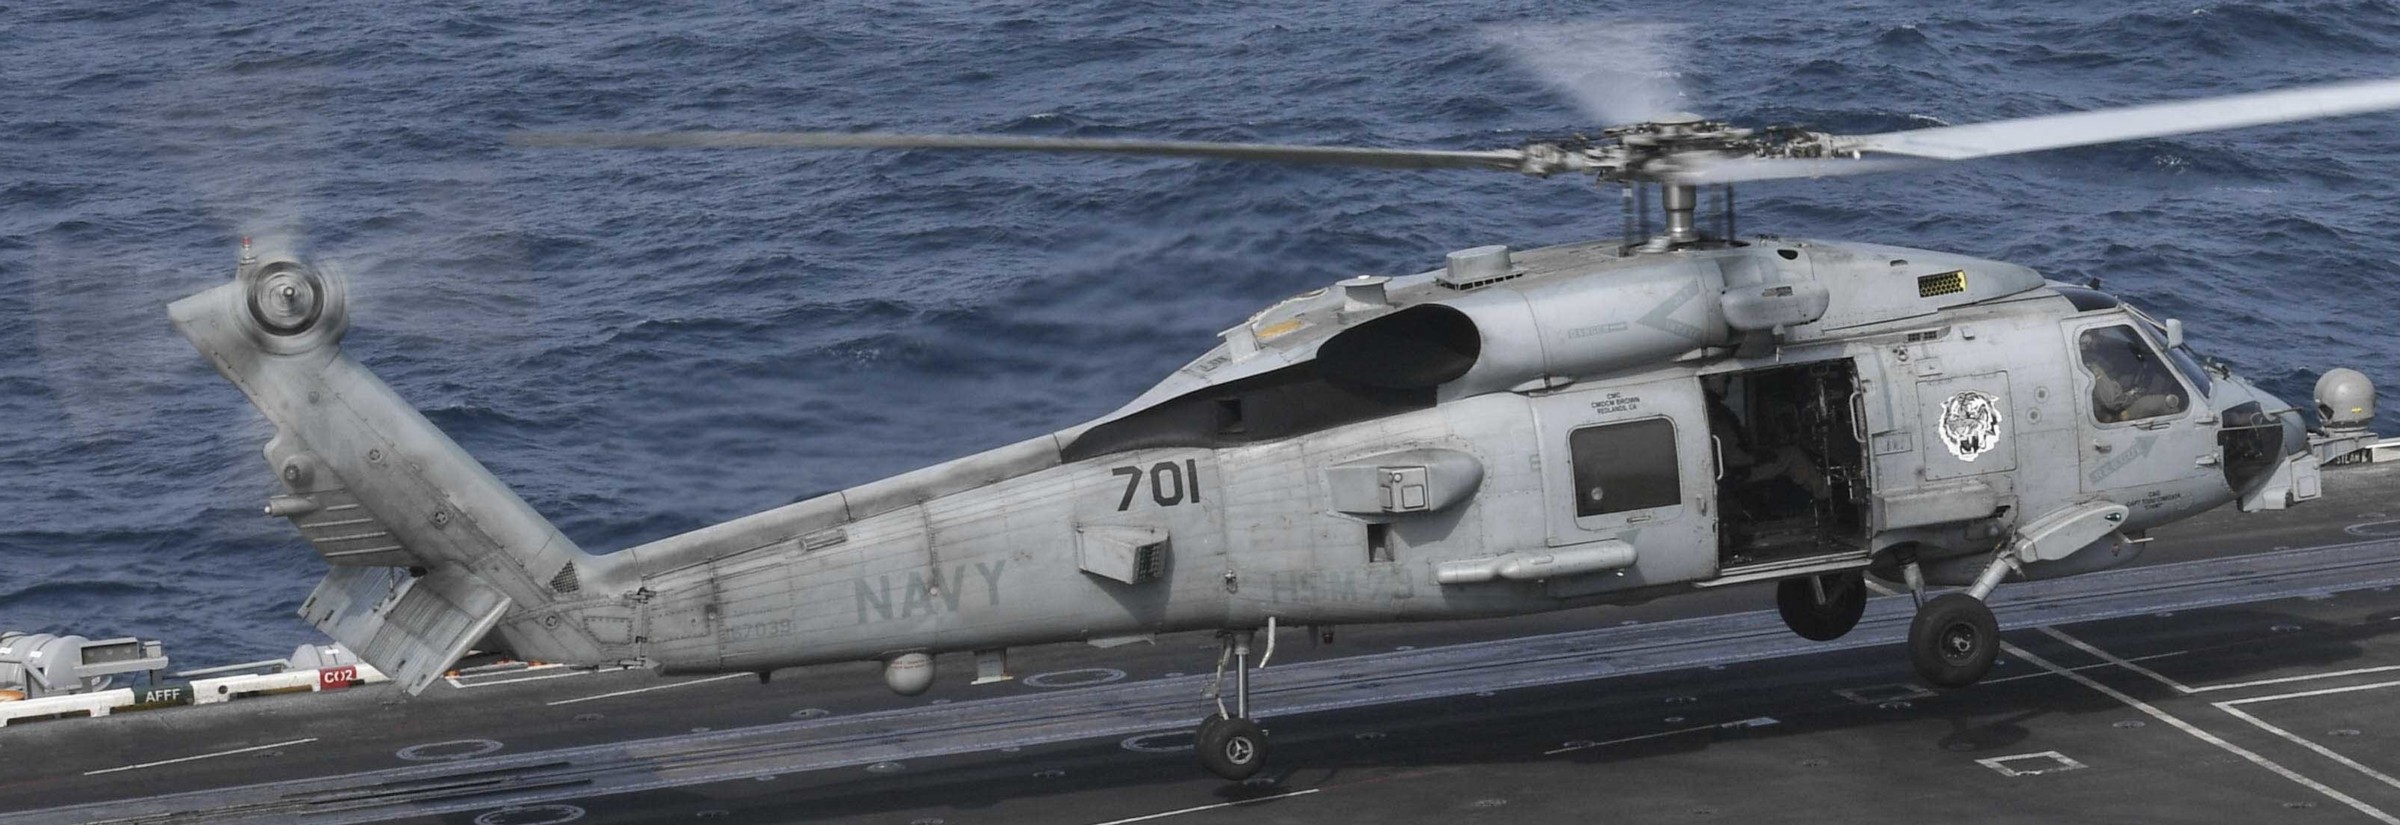 hsm-73 battlecats helicopter maritime strike squadron us navy mh-60r seahawk 2015 29 sonar buoy launcher